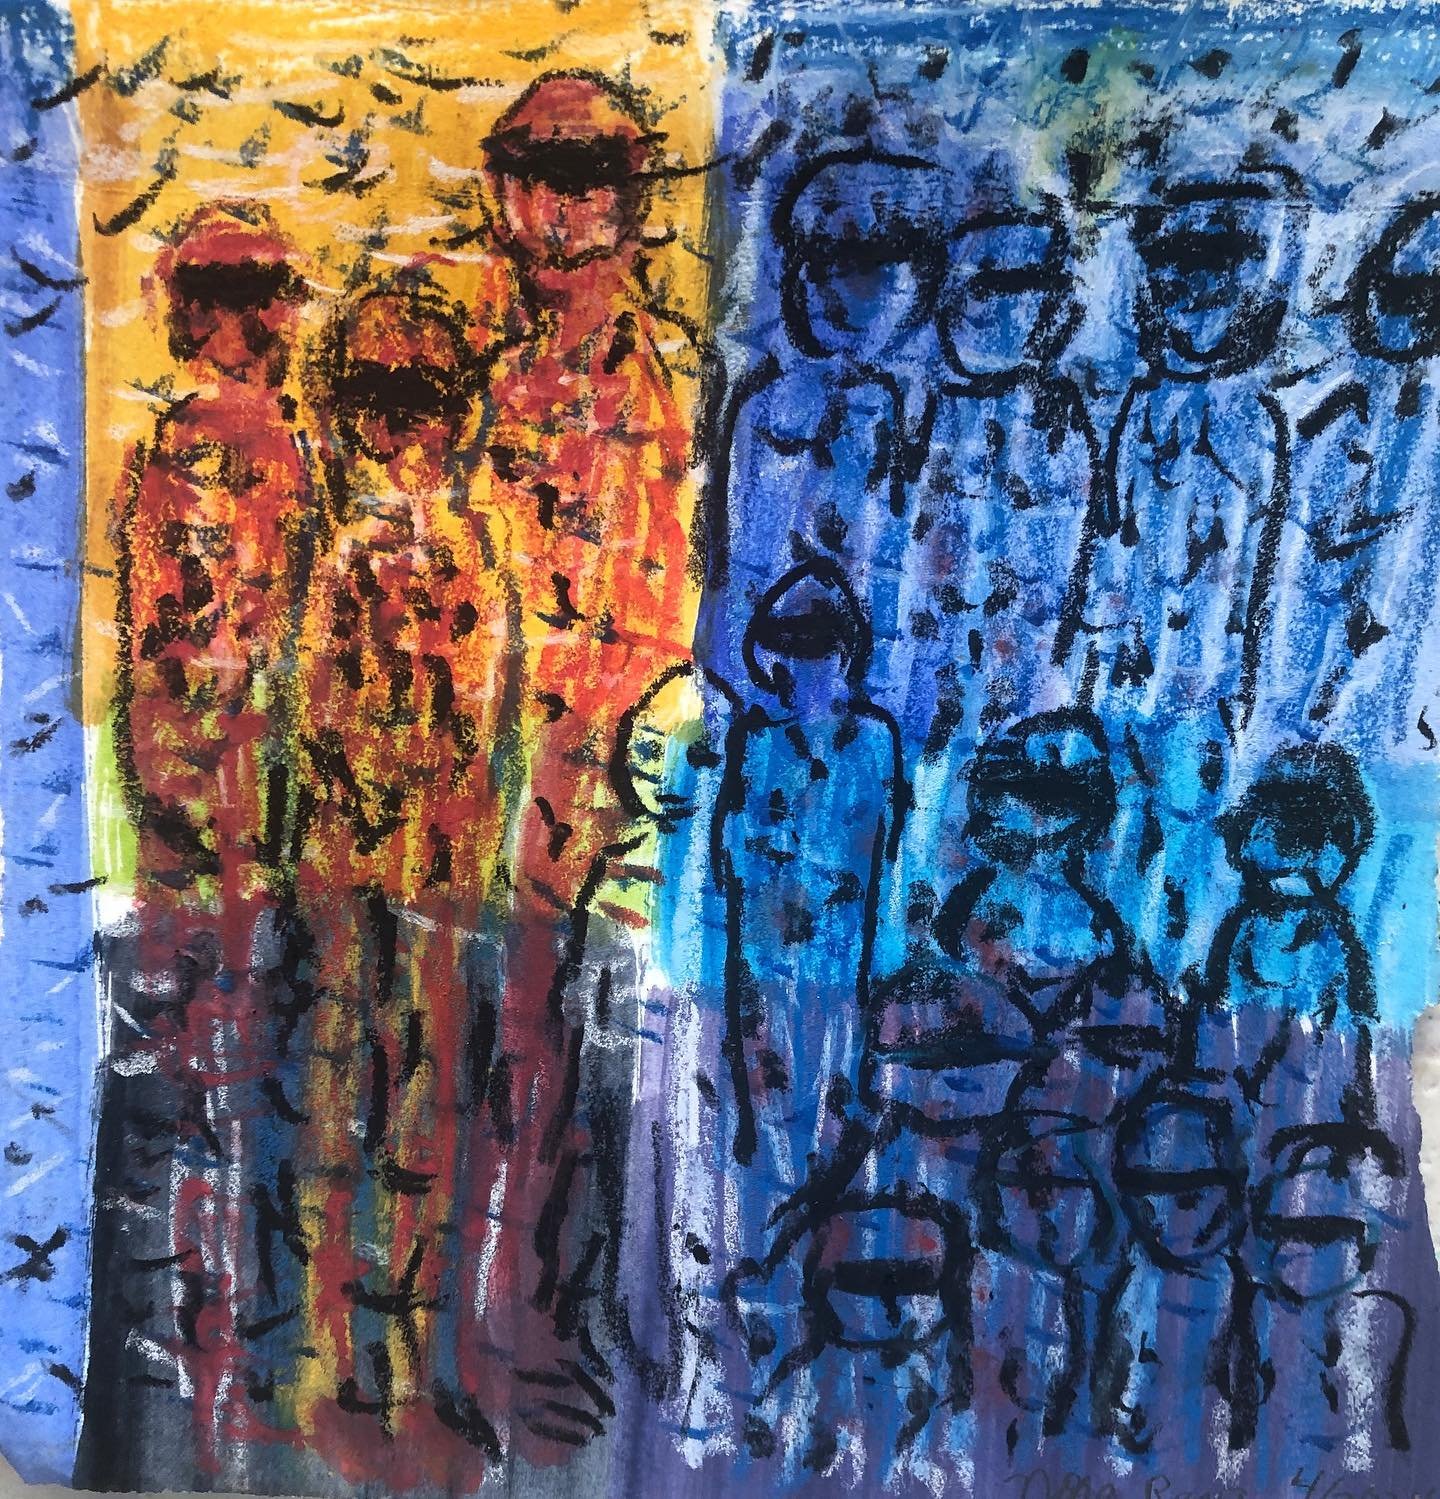 &ldquo;Blindfolded and Detained,&rdquo; #norarezapaintings #worksonpaper #savegaza #ceasefirenow